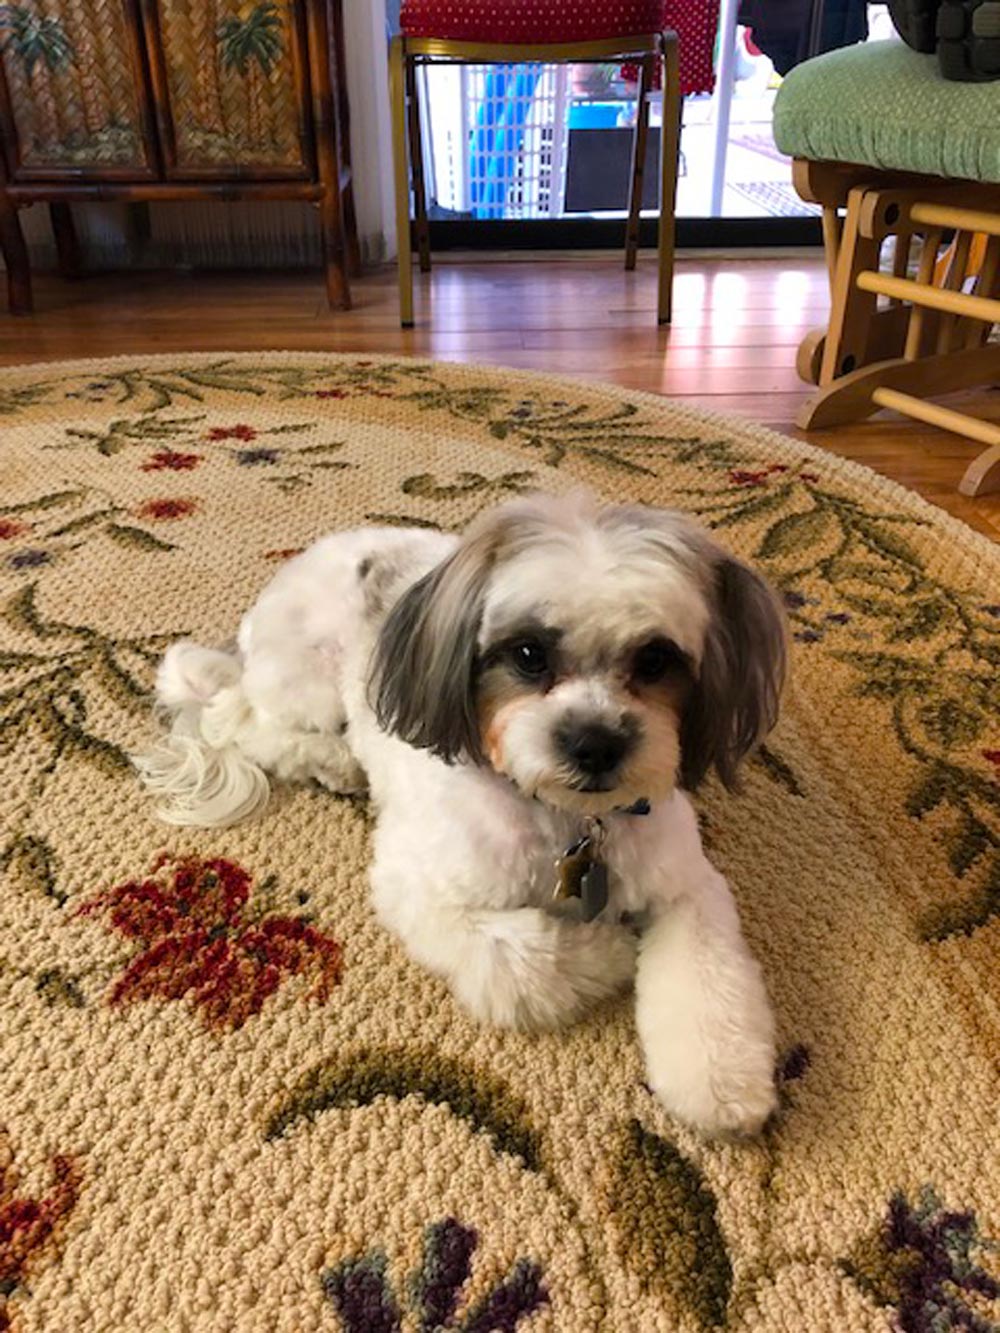 Meet Daisy. Twenty months old, Daisy's a non-shedding Maltese/Shih Tzu. She's as smart and as cute as she can be, and she believes everyone loves her. Everyone does! The neighbor gives Daisy treats, for a Sit and a handshake.